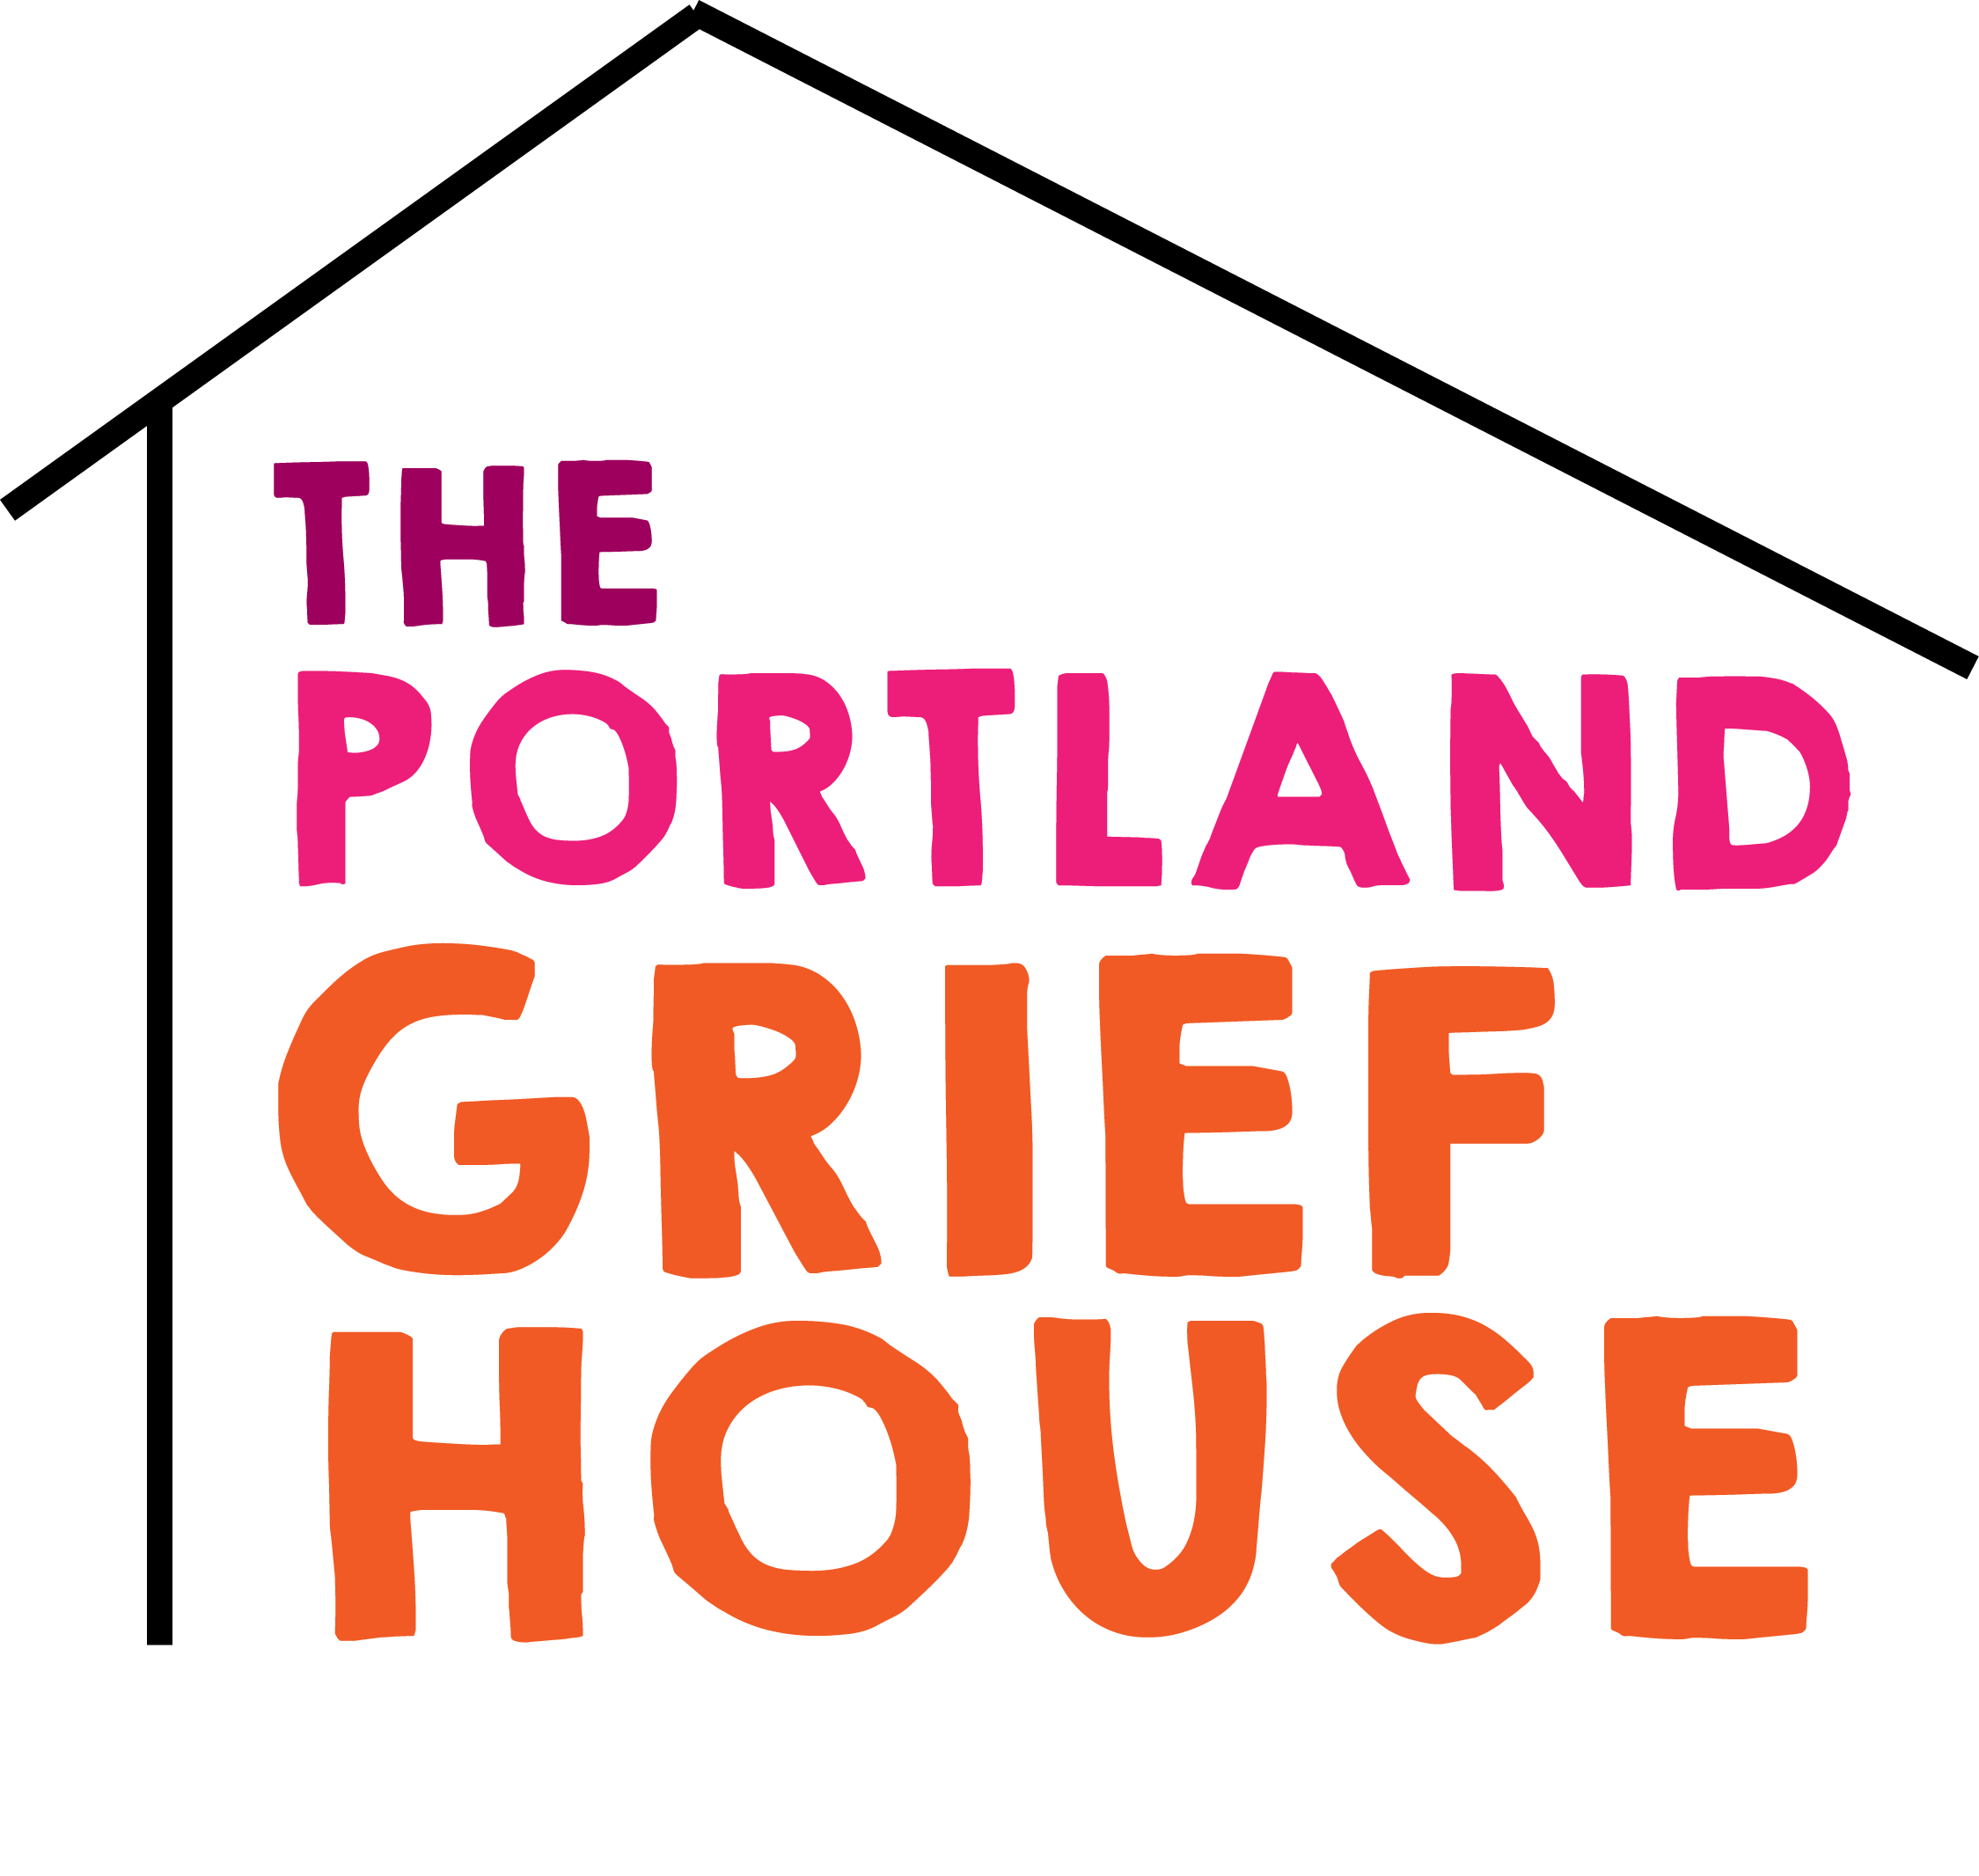 Portland grief house logo. Text inside of a simple drawing of a house.